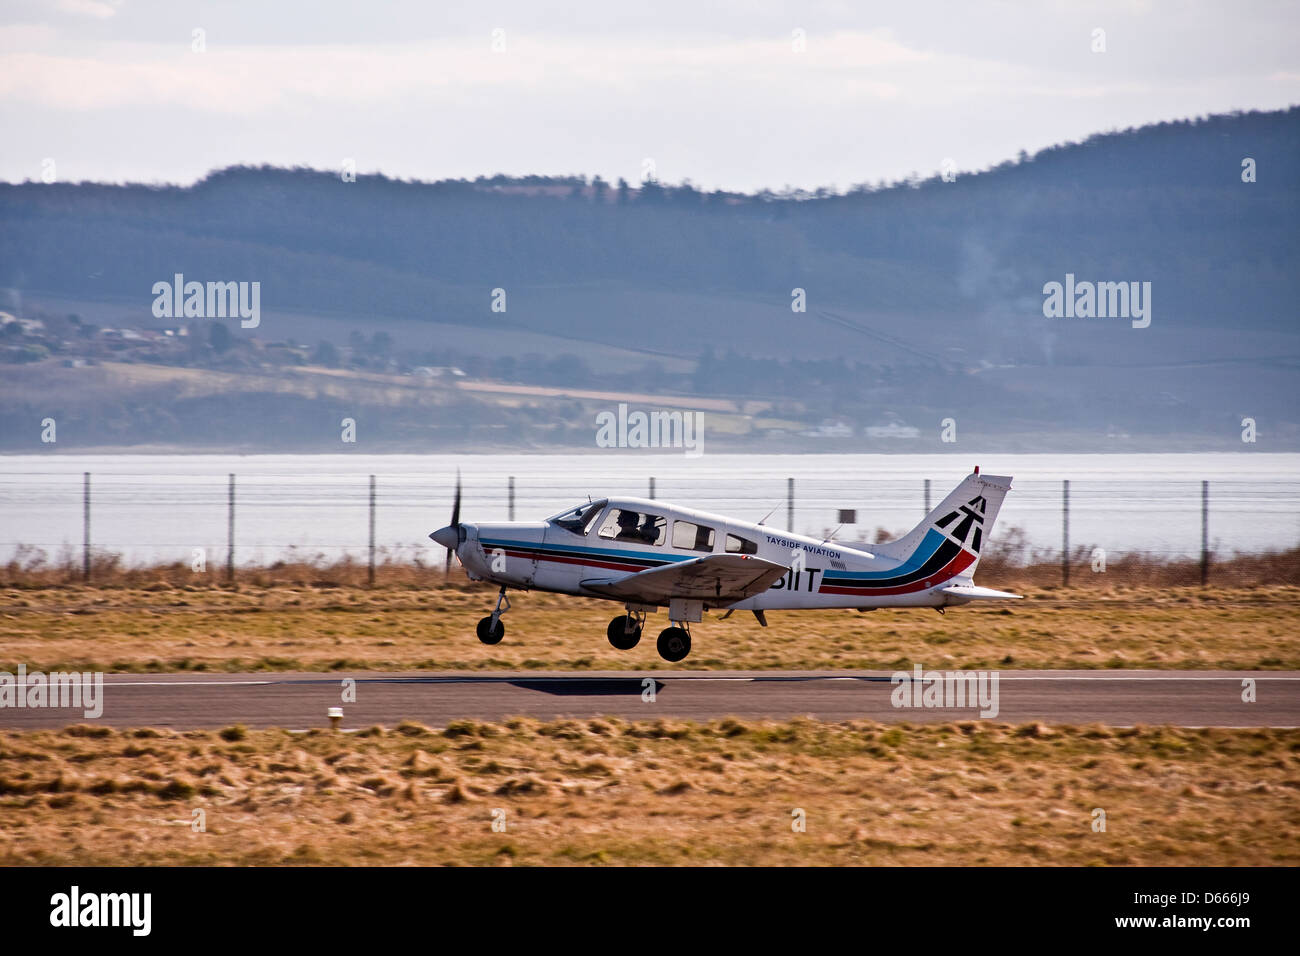 Tayside Aviation Piper PA-28 Warrior G-BIIT aircraft taking off from the runway at Dundee Airport,UK Stock Photo